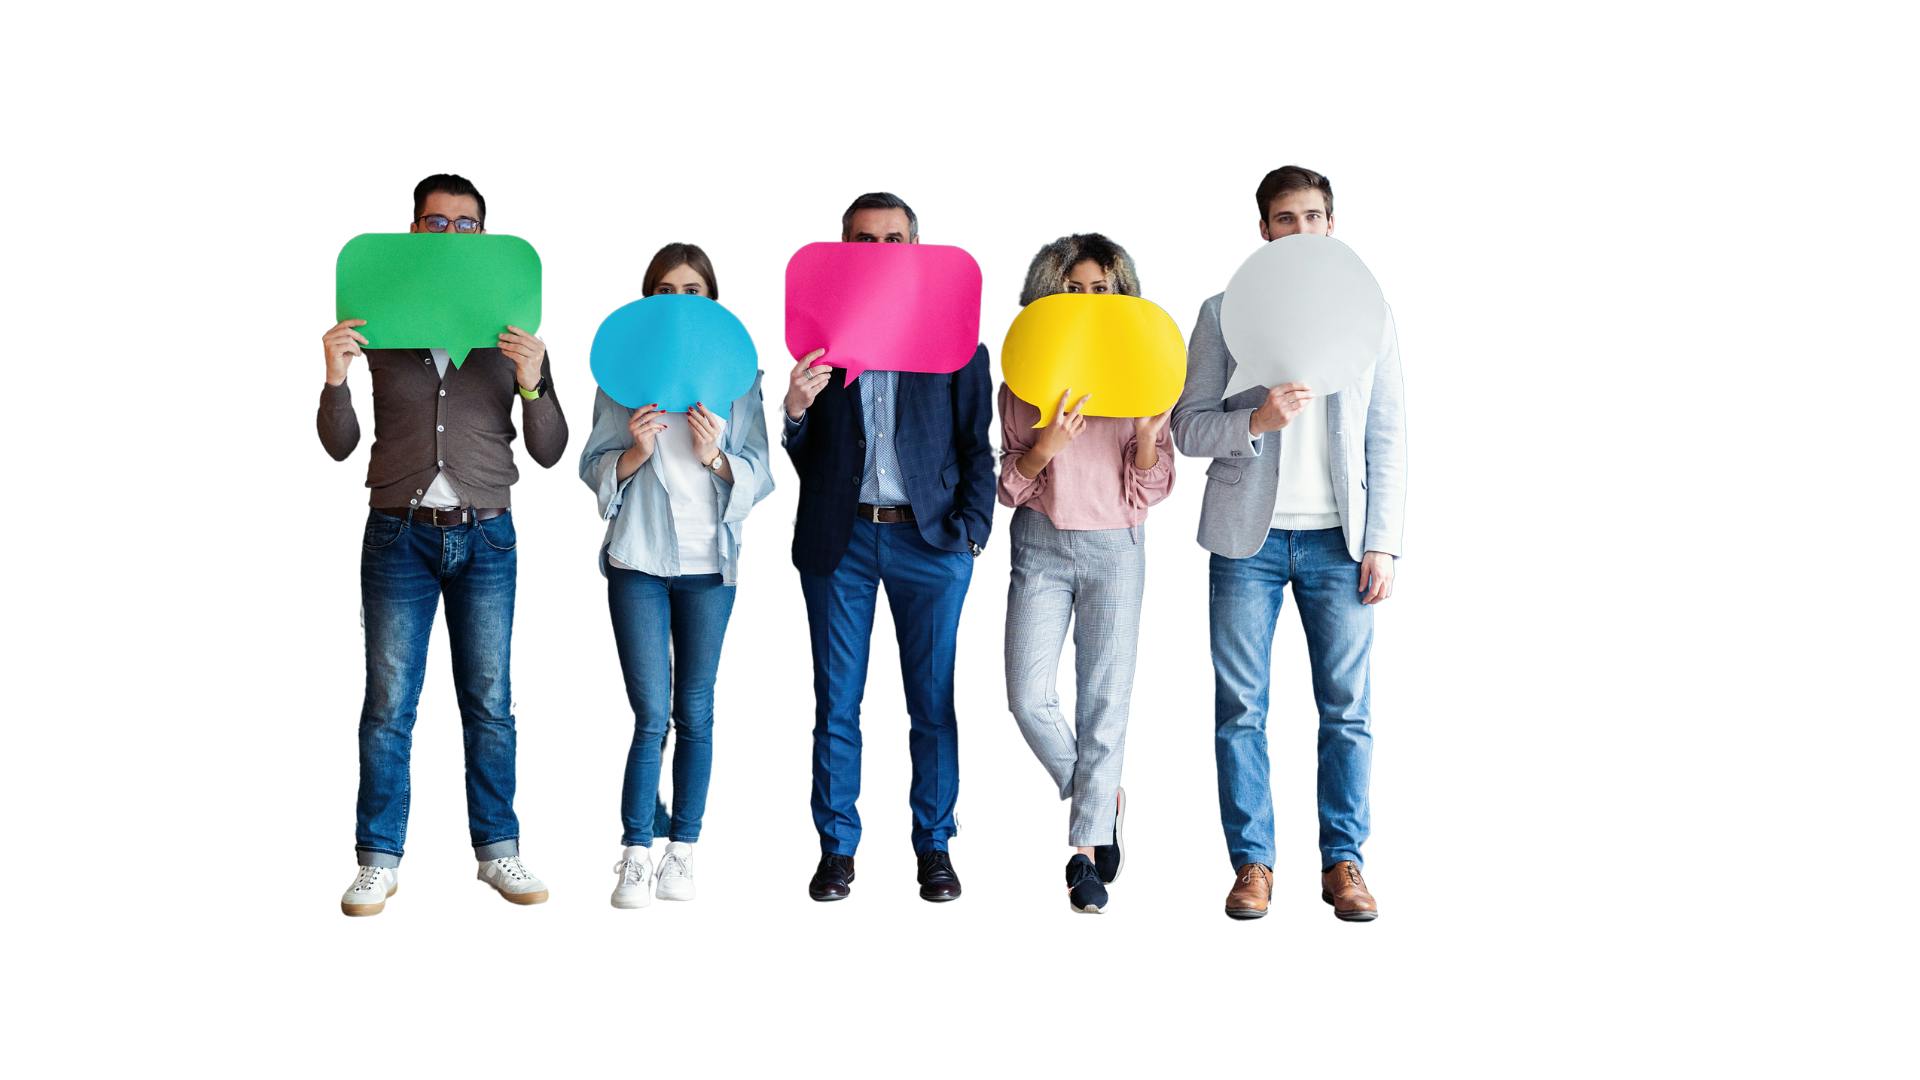 5 people standing in a line with their mouths covered by a piece of paper that looks like a speech bubble. It represents that some people cannot always use their voice and opinions even though they have something to say or share.